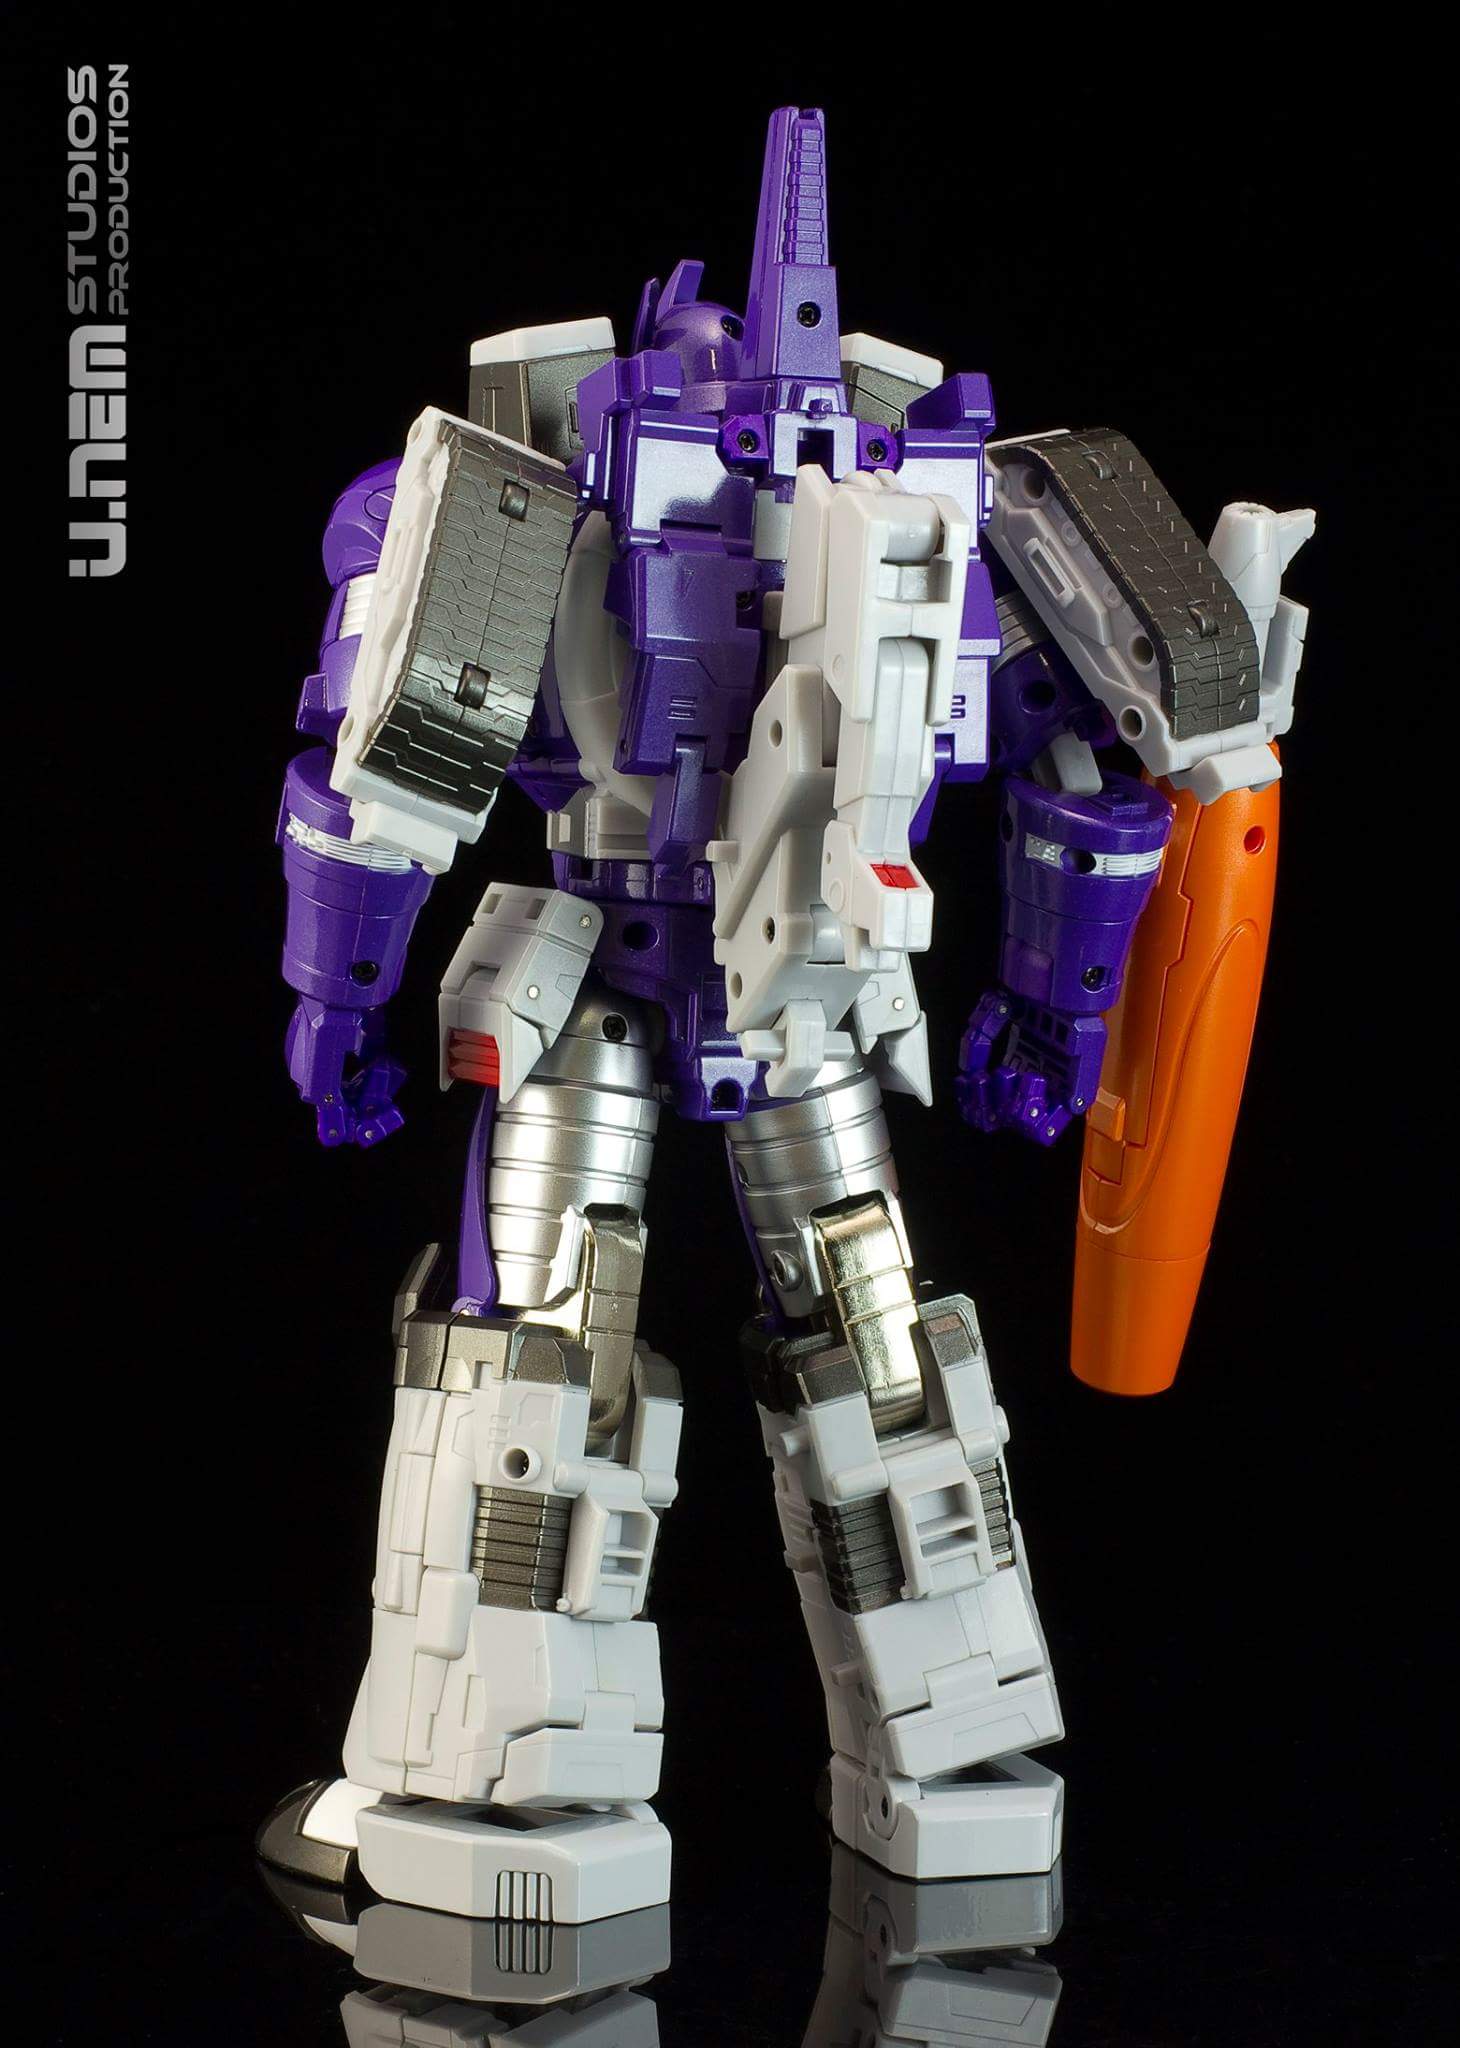 [Fanstoys] Produit Tiers - FT-16 Sovereign - aka Galvatron - Page 3 5G4smaWL